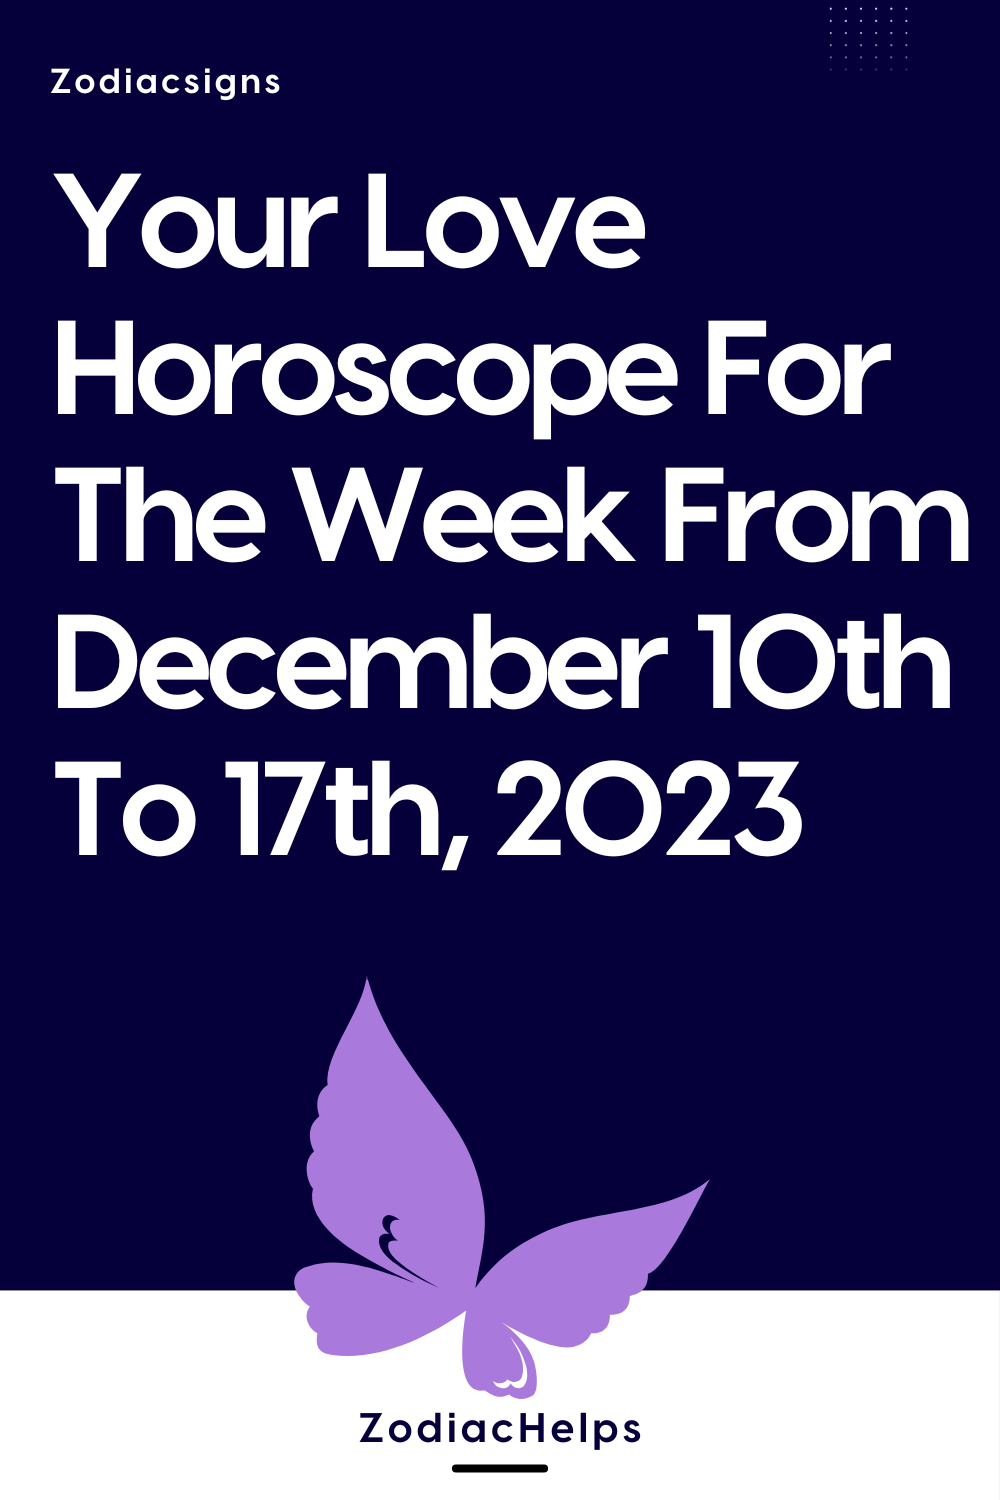 Your Love Horoscope For The Week From December 10th To 17th, 2023